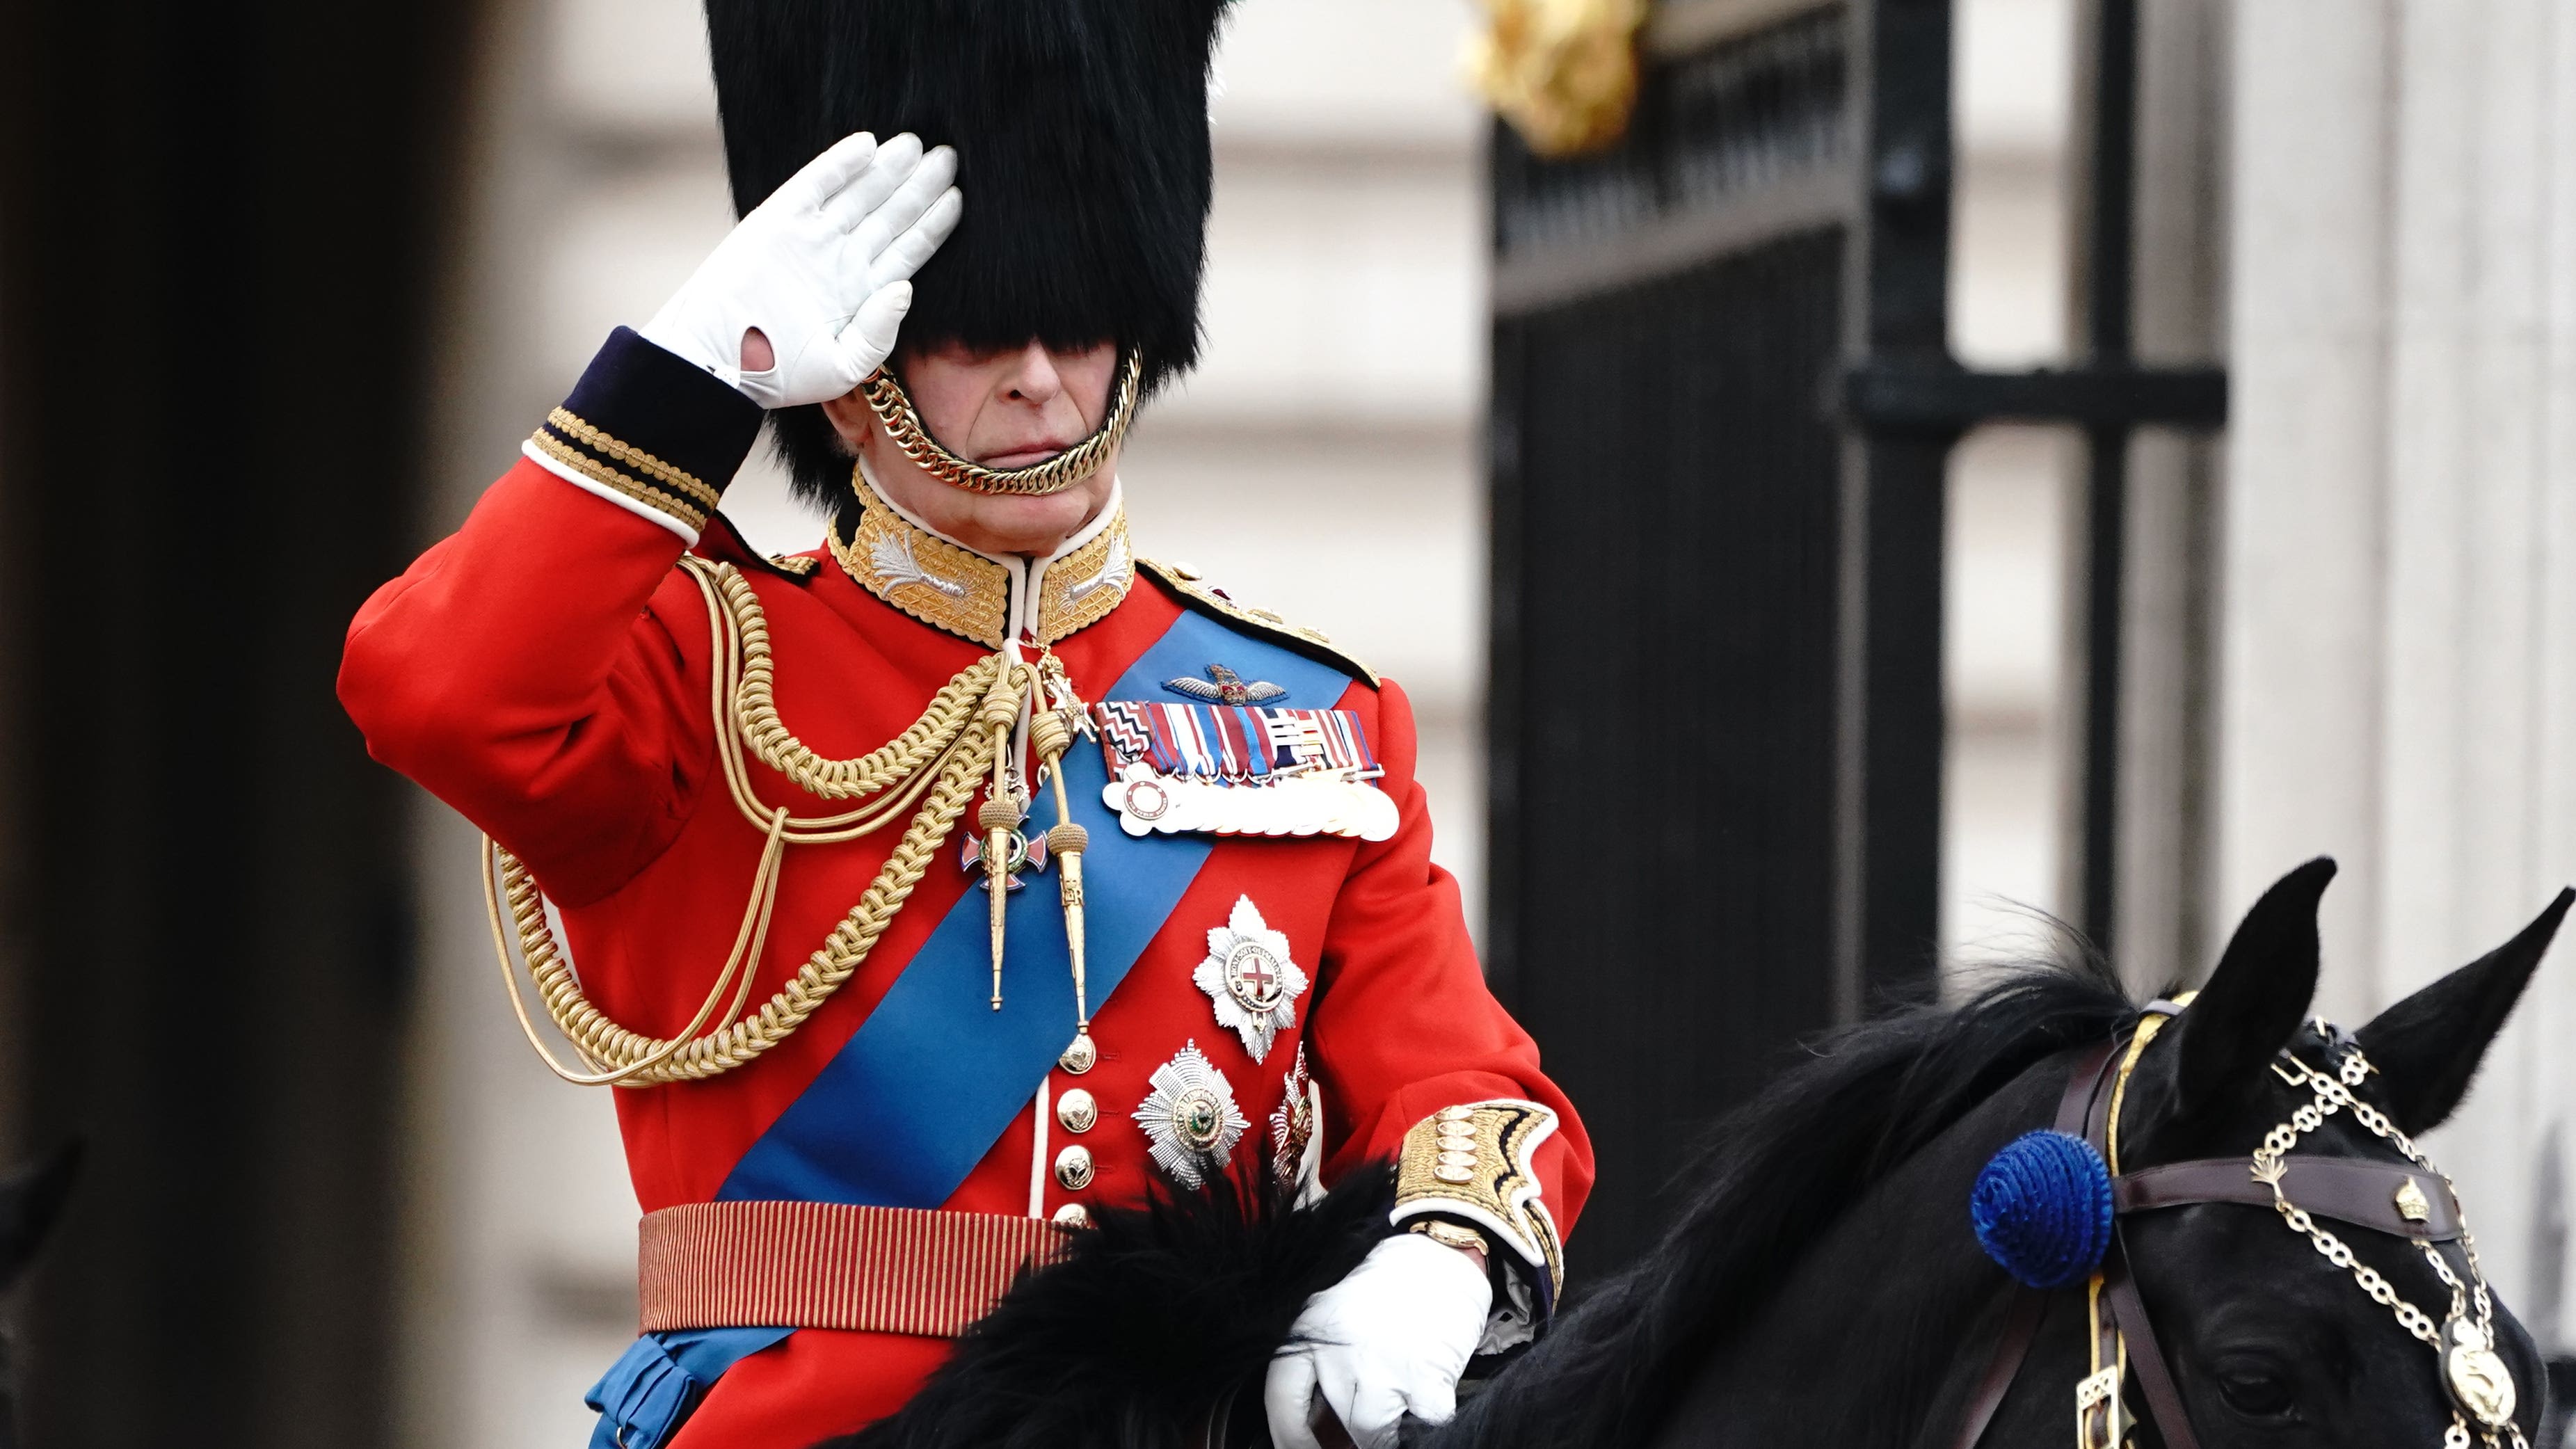 We’ll have to step up our game at Trooping the Colour for the King, Army leaders